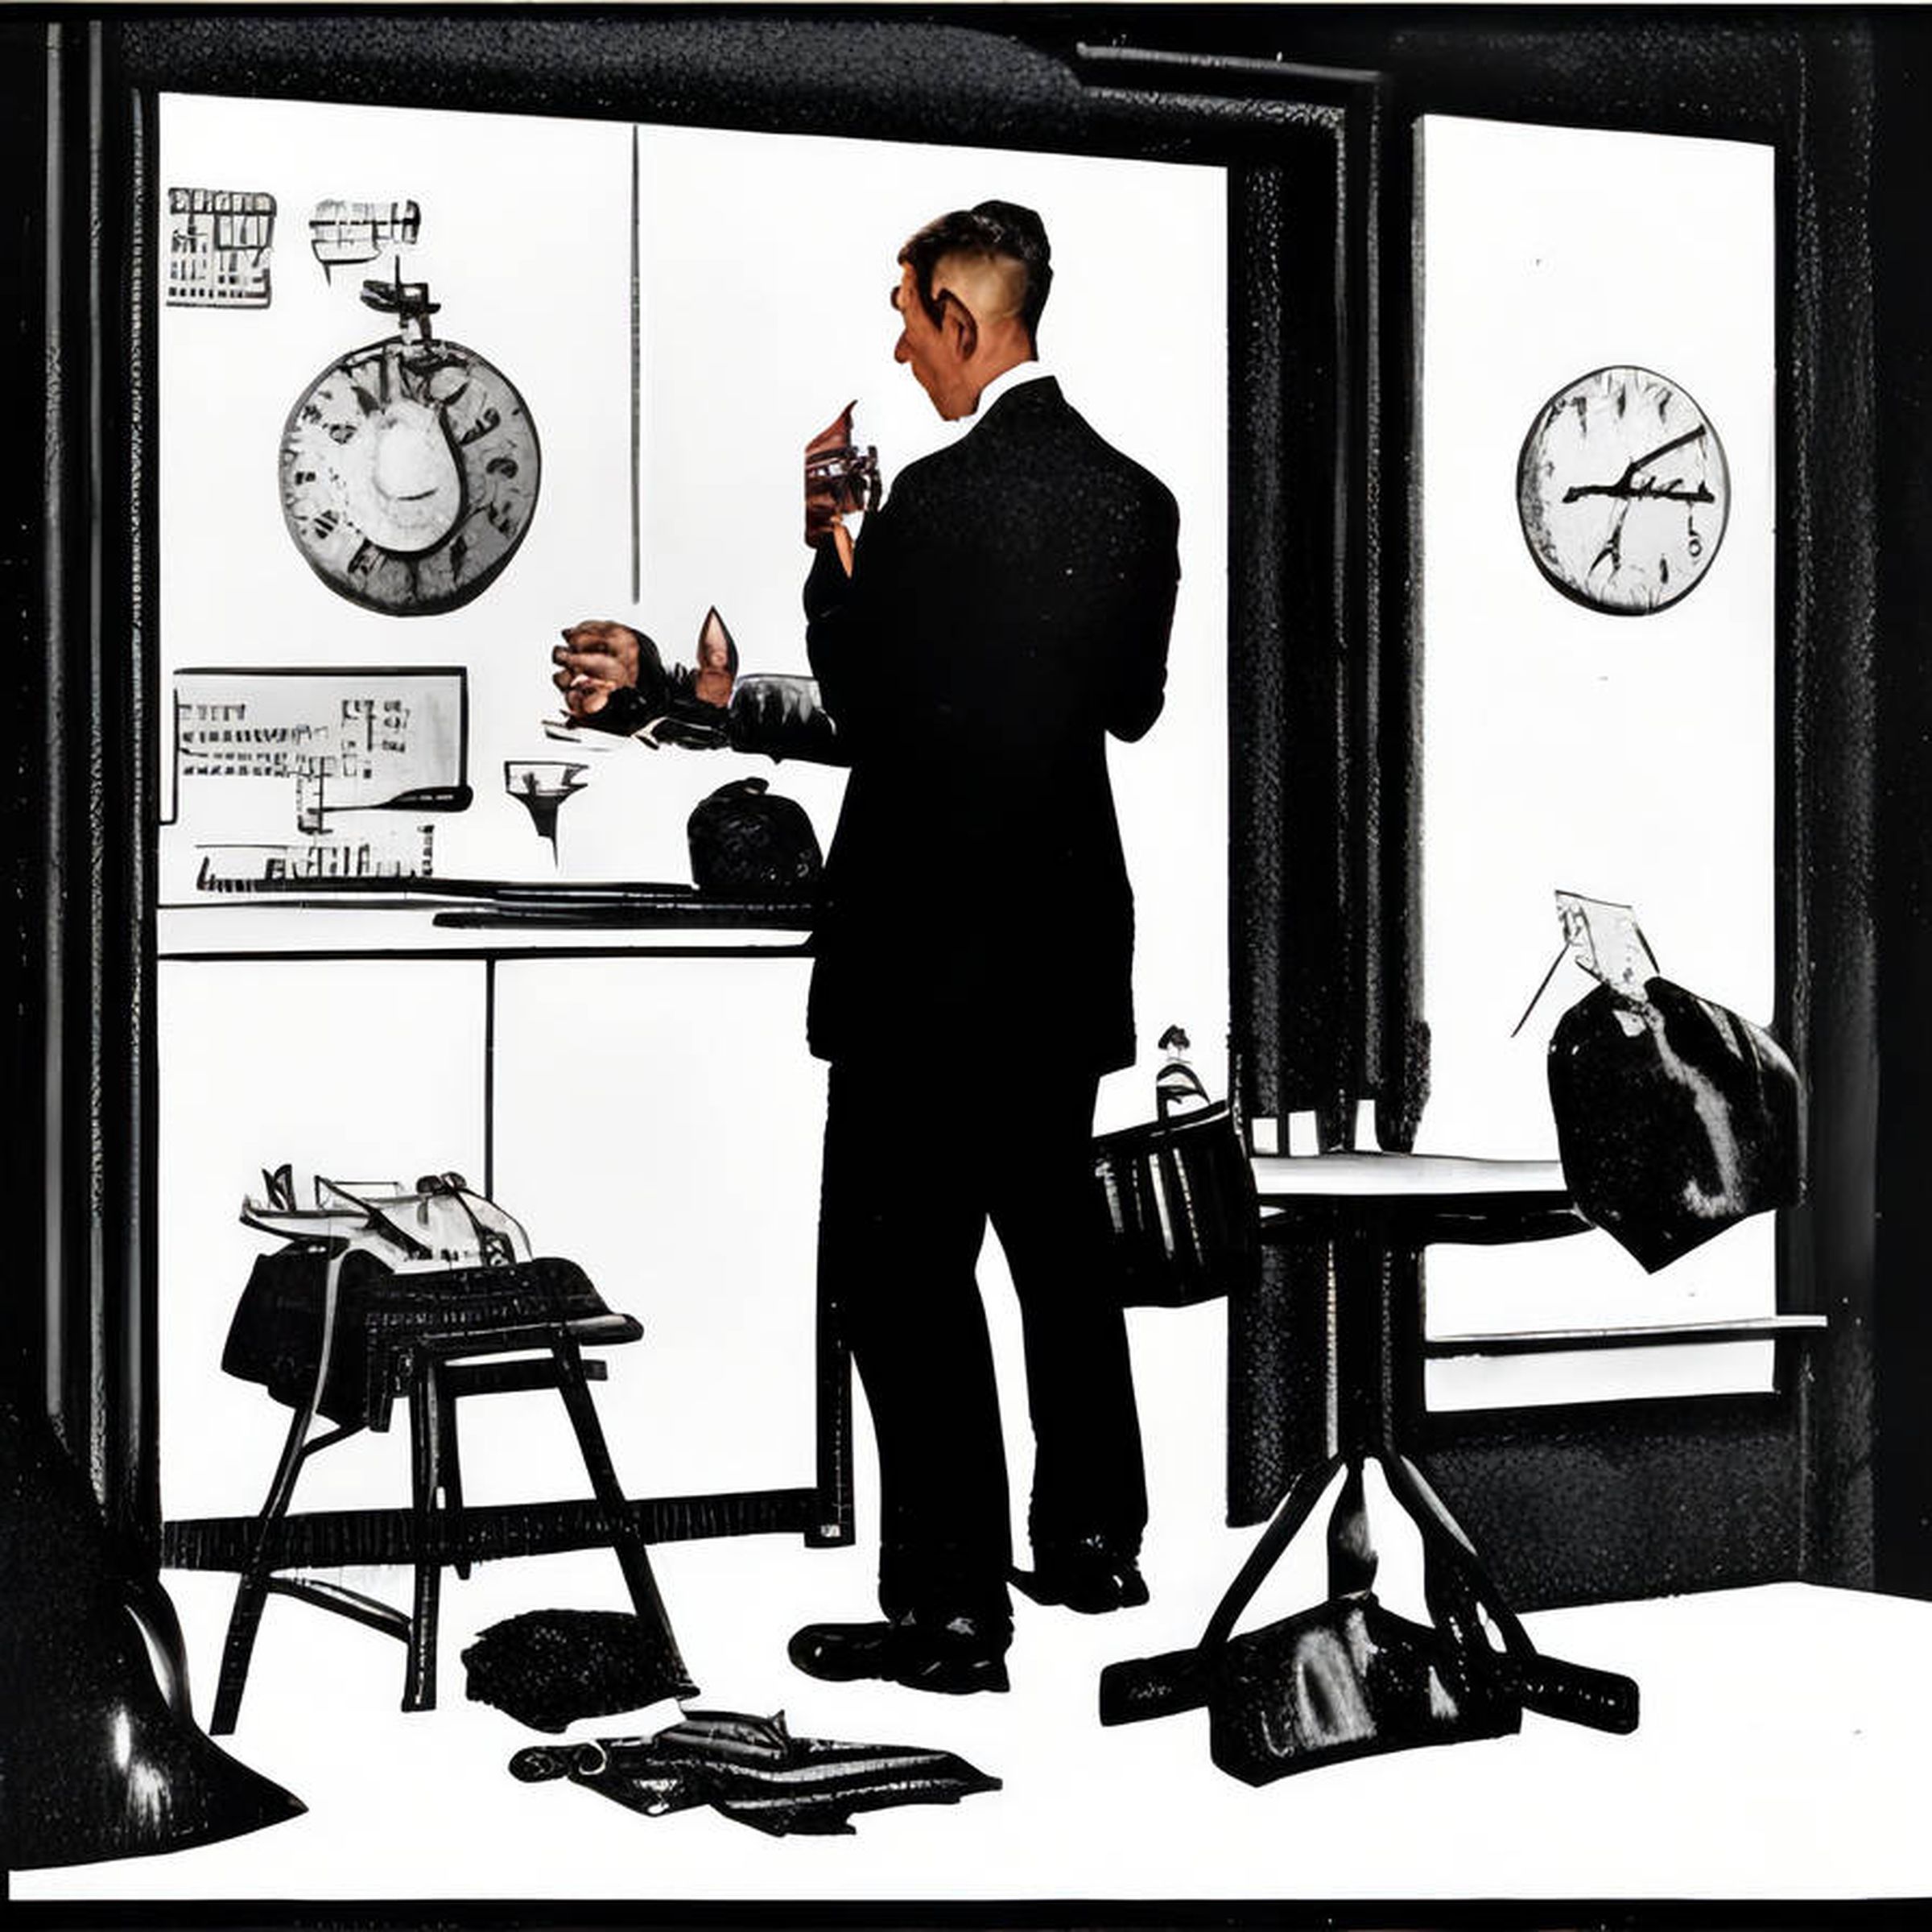 A DreamUp generation for “a man in a 1950s business suit defusing a bomb at a table in the style of Norman Rockwell.”